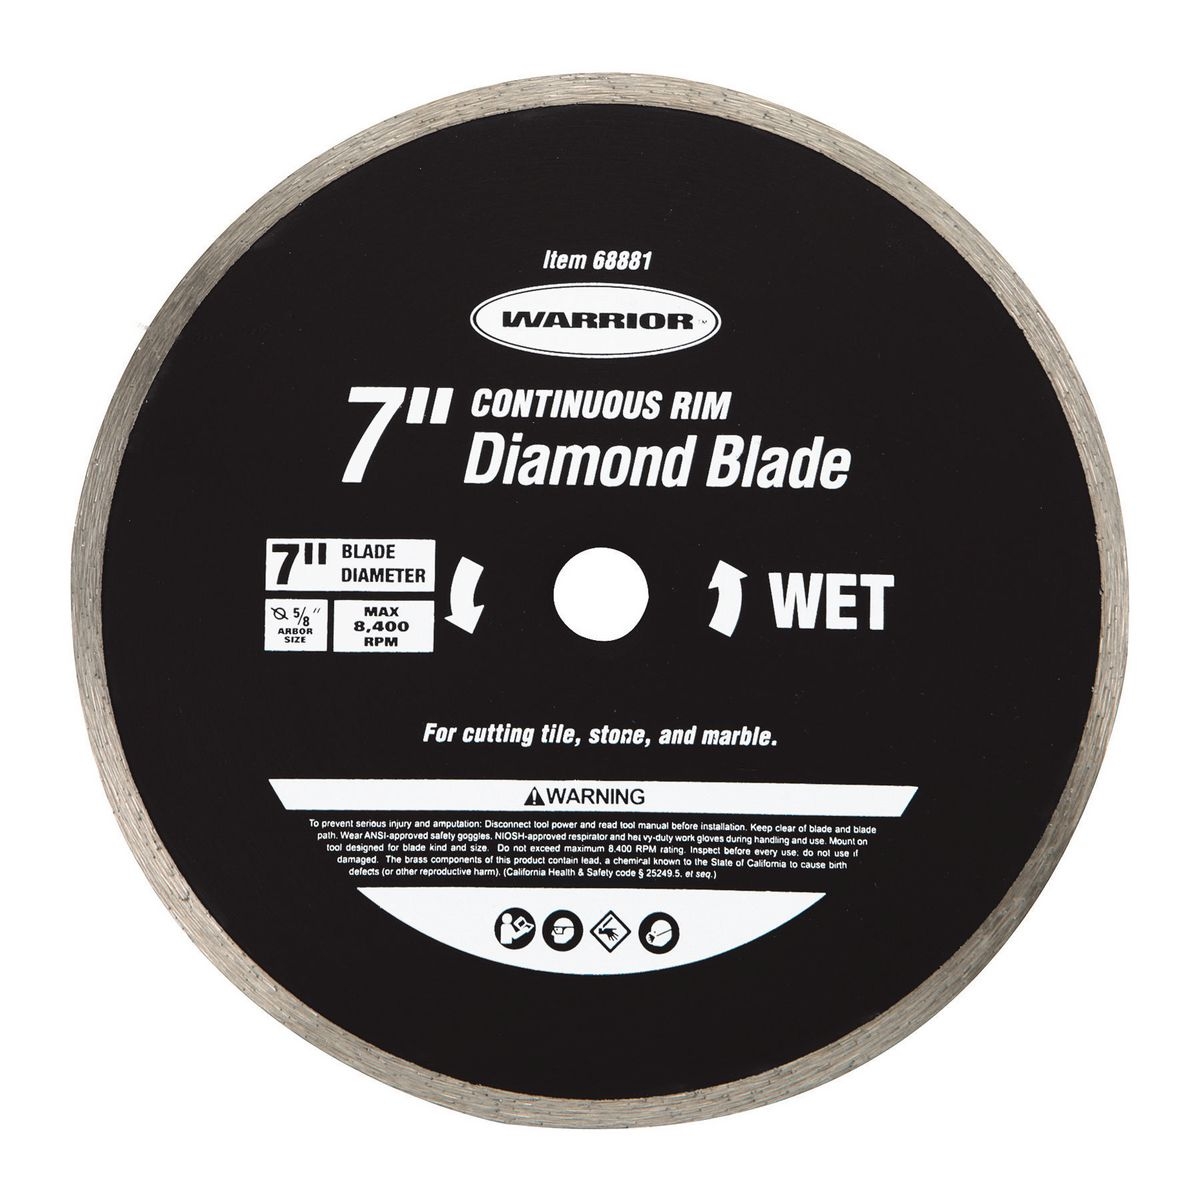 WARRIOR 7 in. Continuous Rim Wet Cut Tile Saw and Masonry Diamond Blade - Item 68881